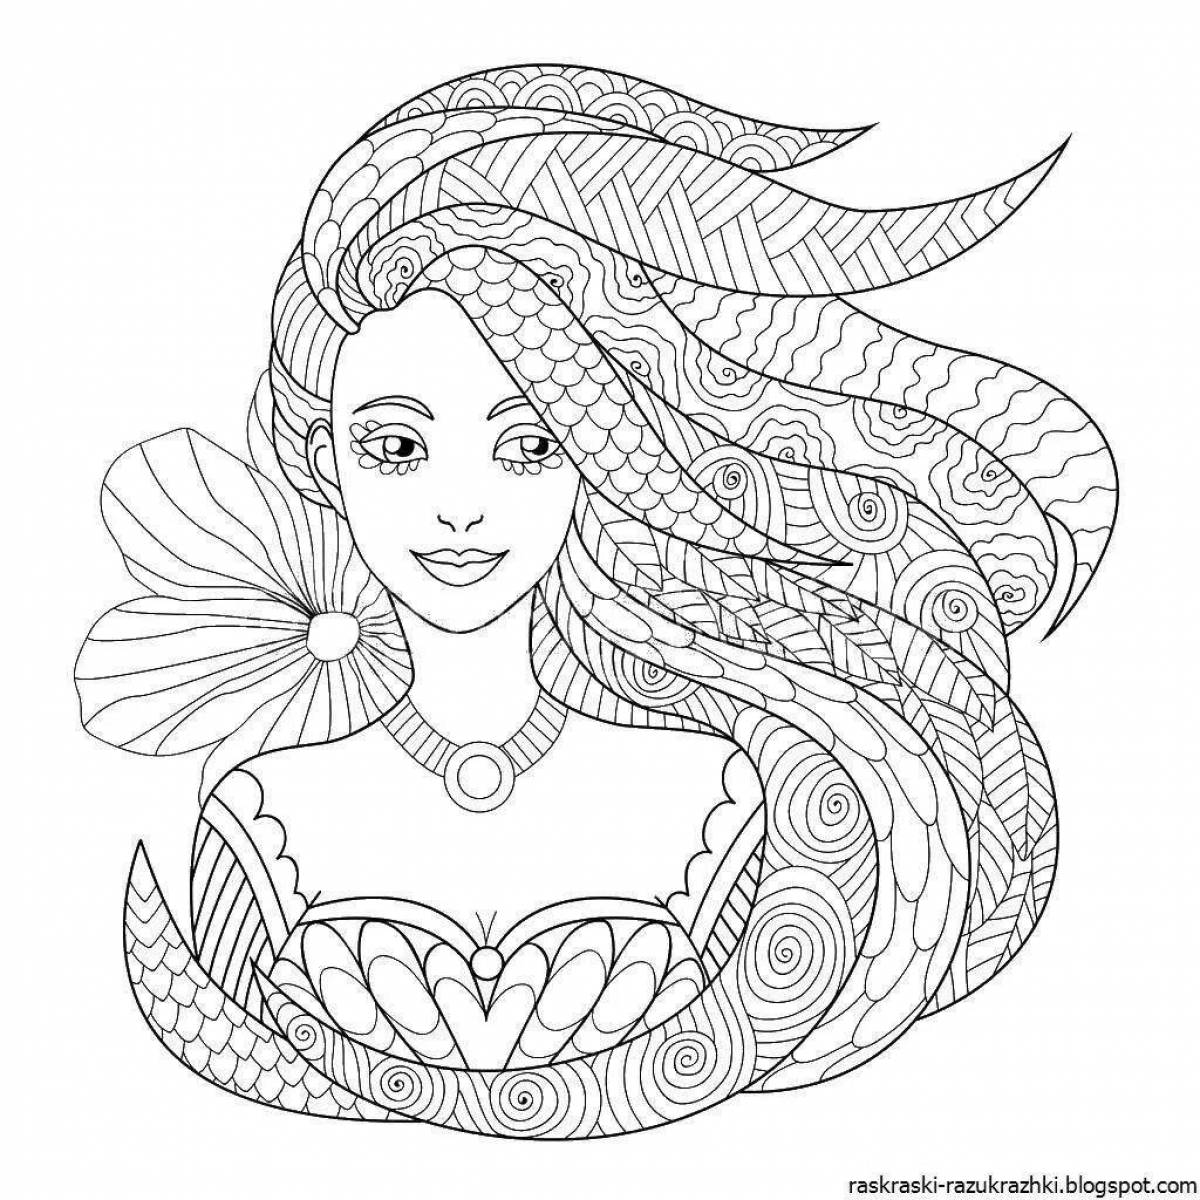 100000000000 year old glitter coloring book for girls